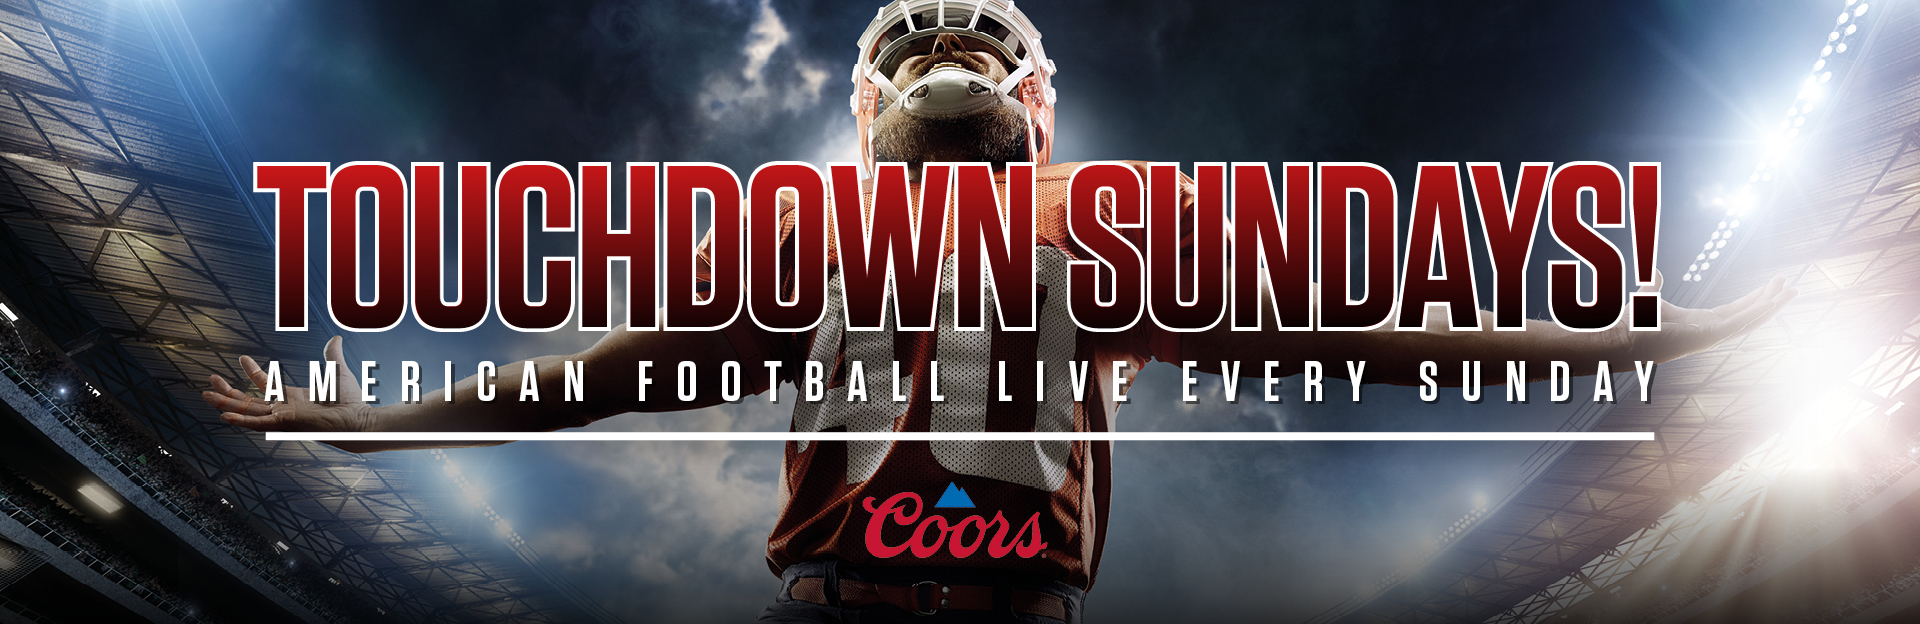 Watch NFL at The Crown Hotel